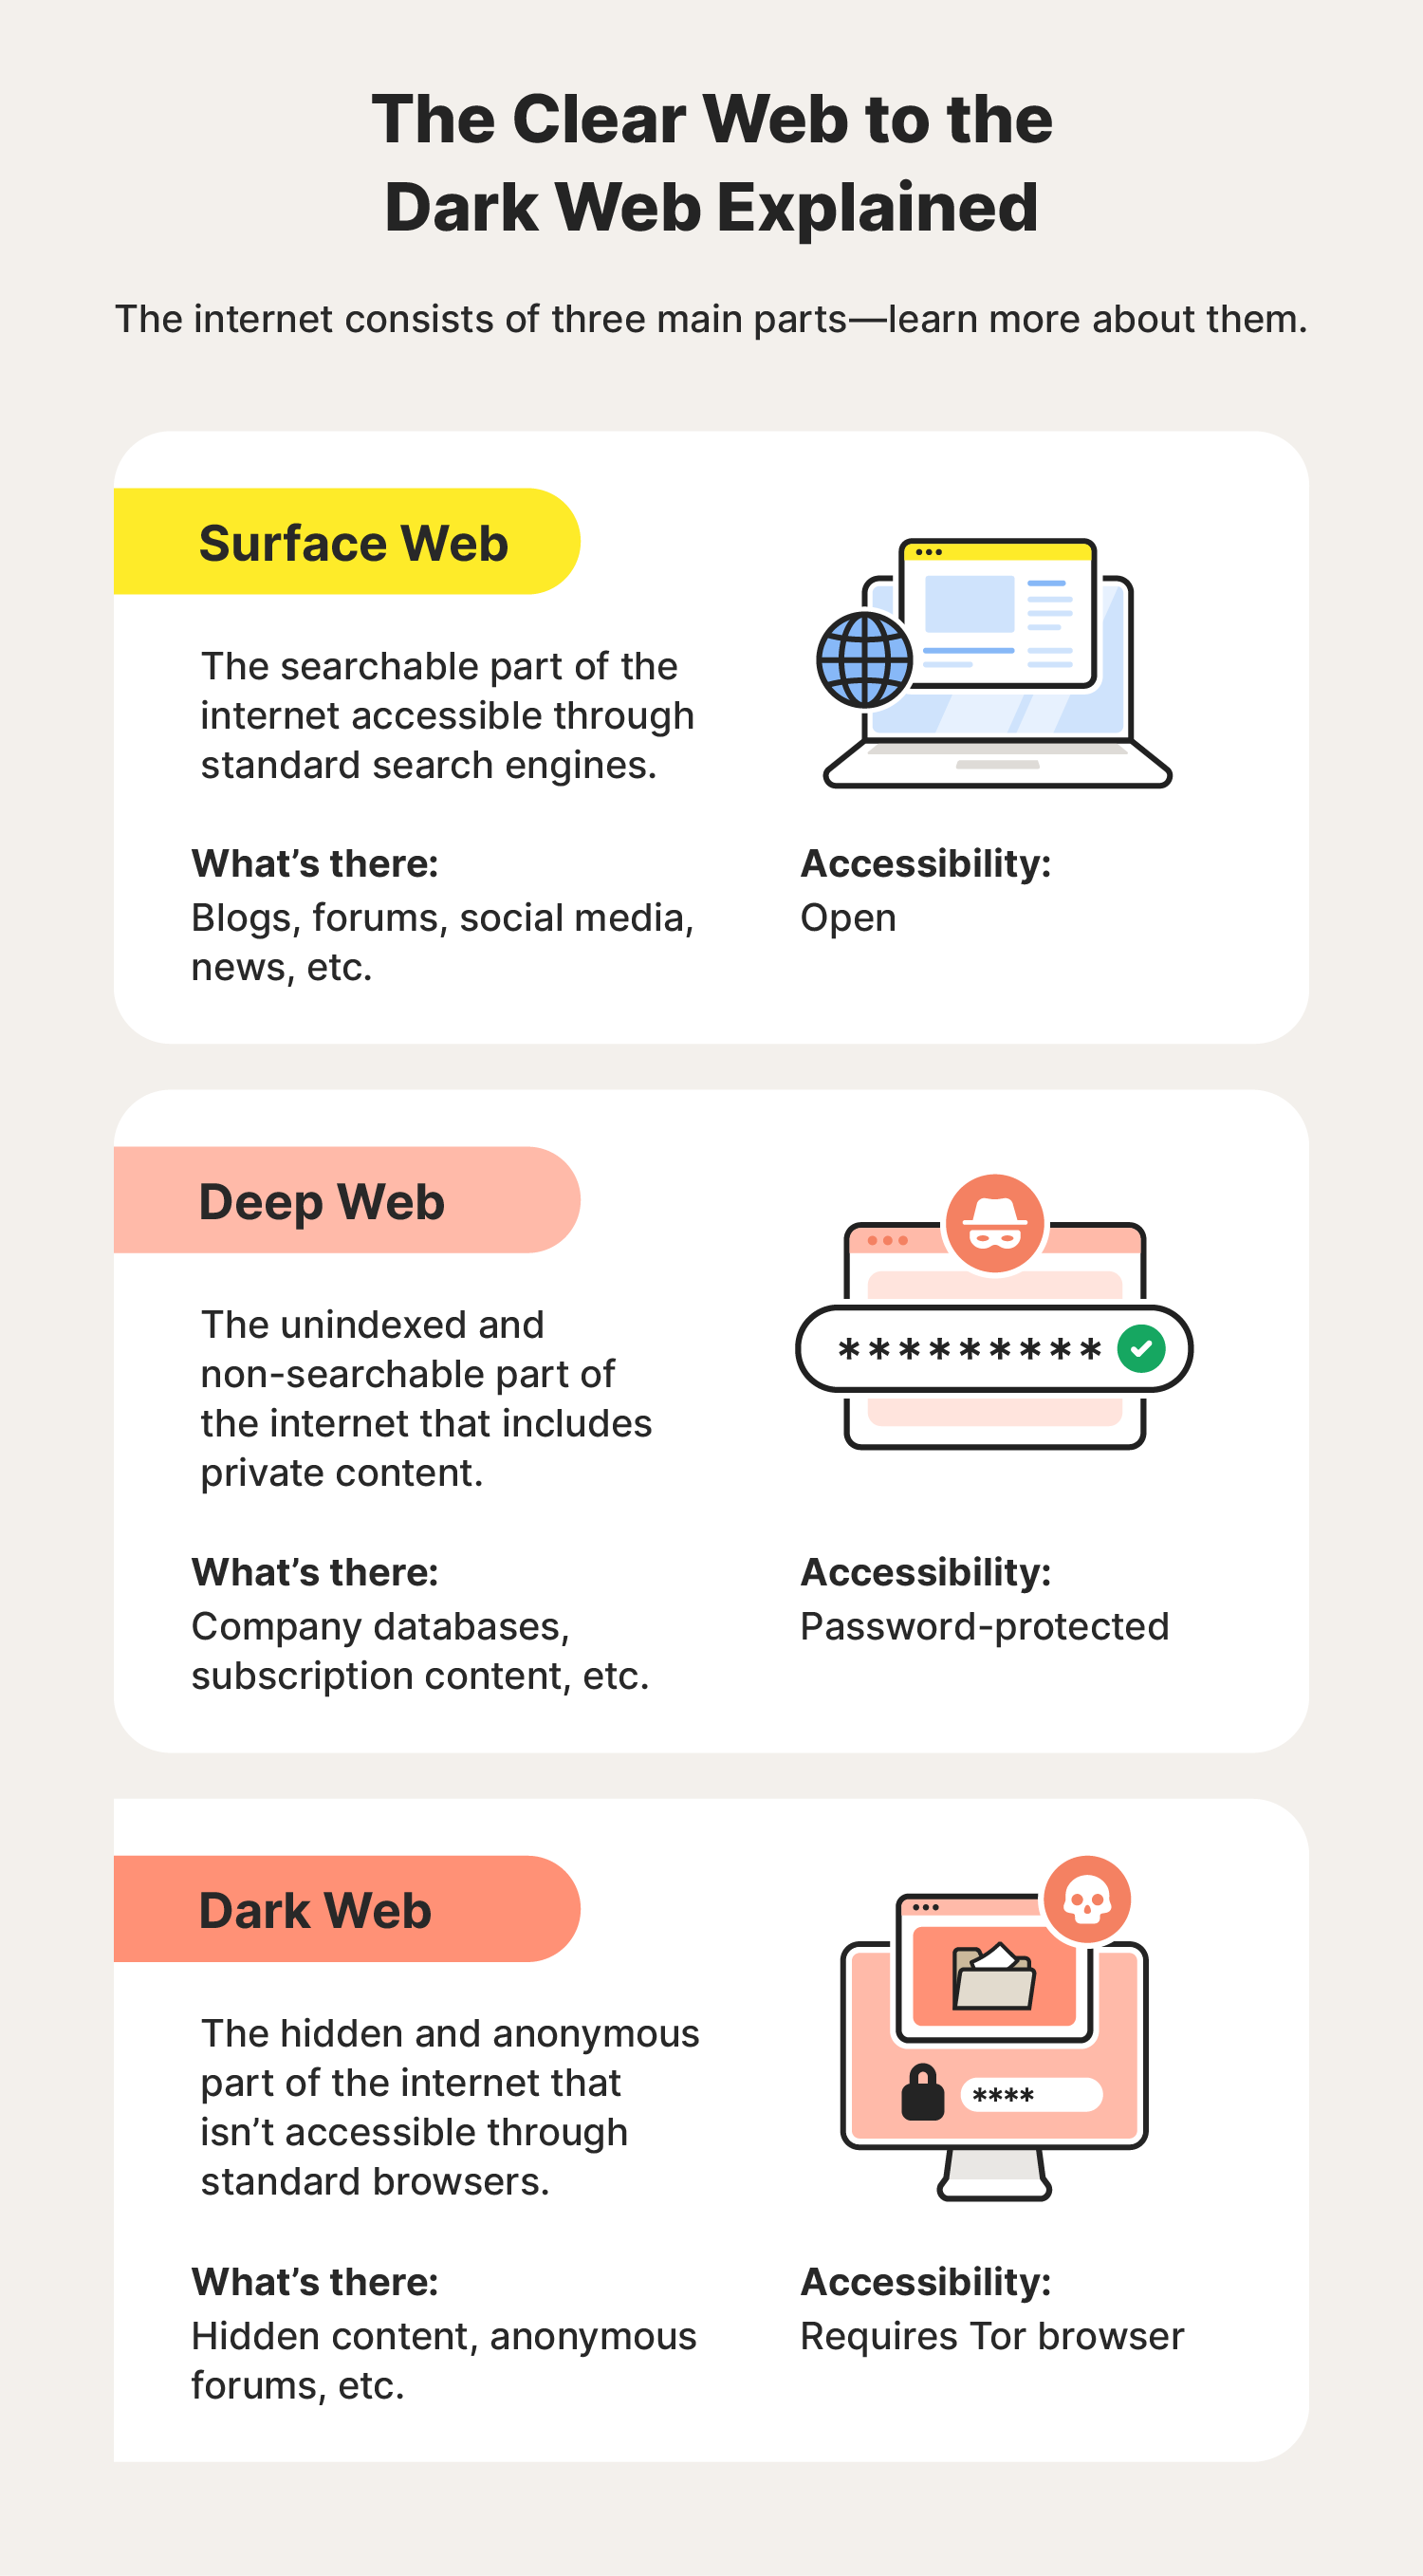 An overview of the parts of the web, what can be found there, and how difficult it is to reach.